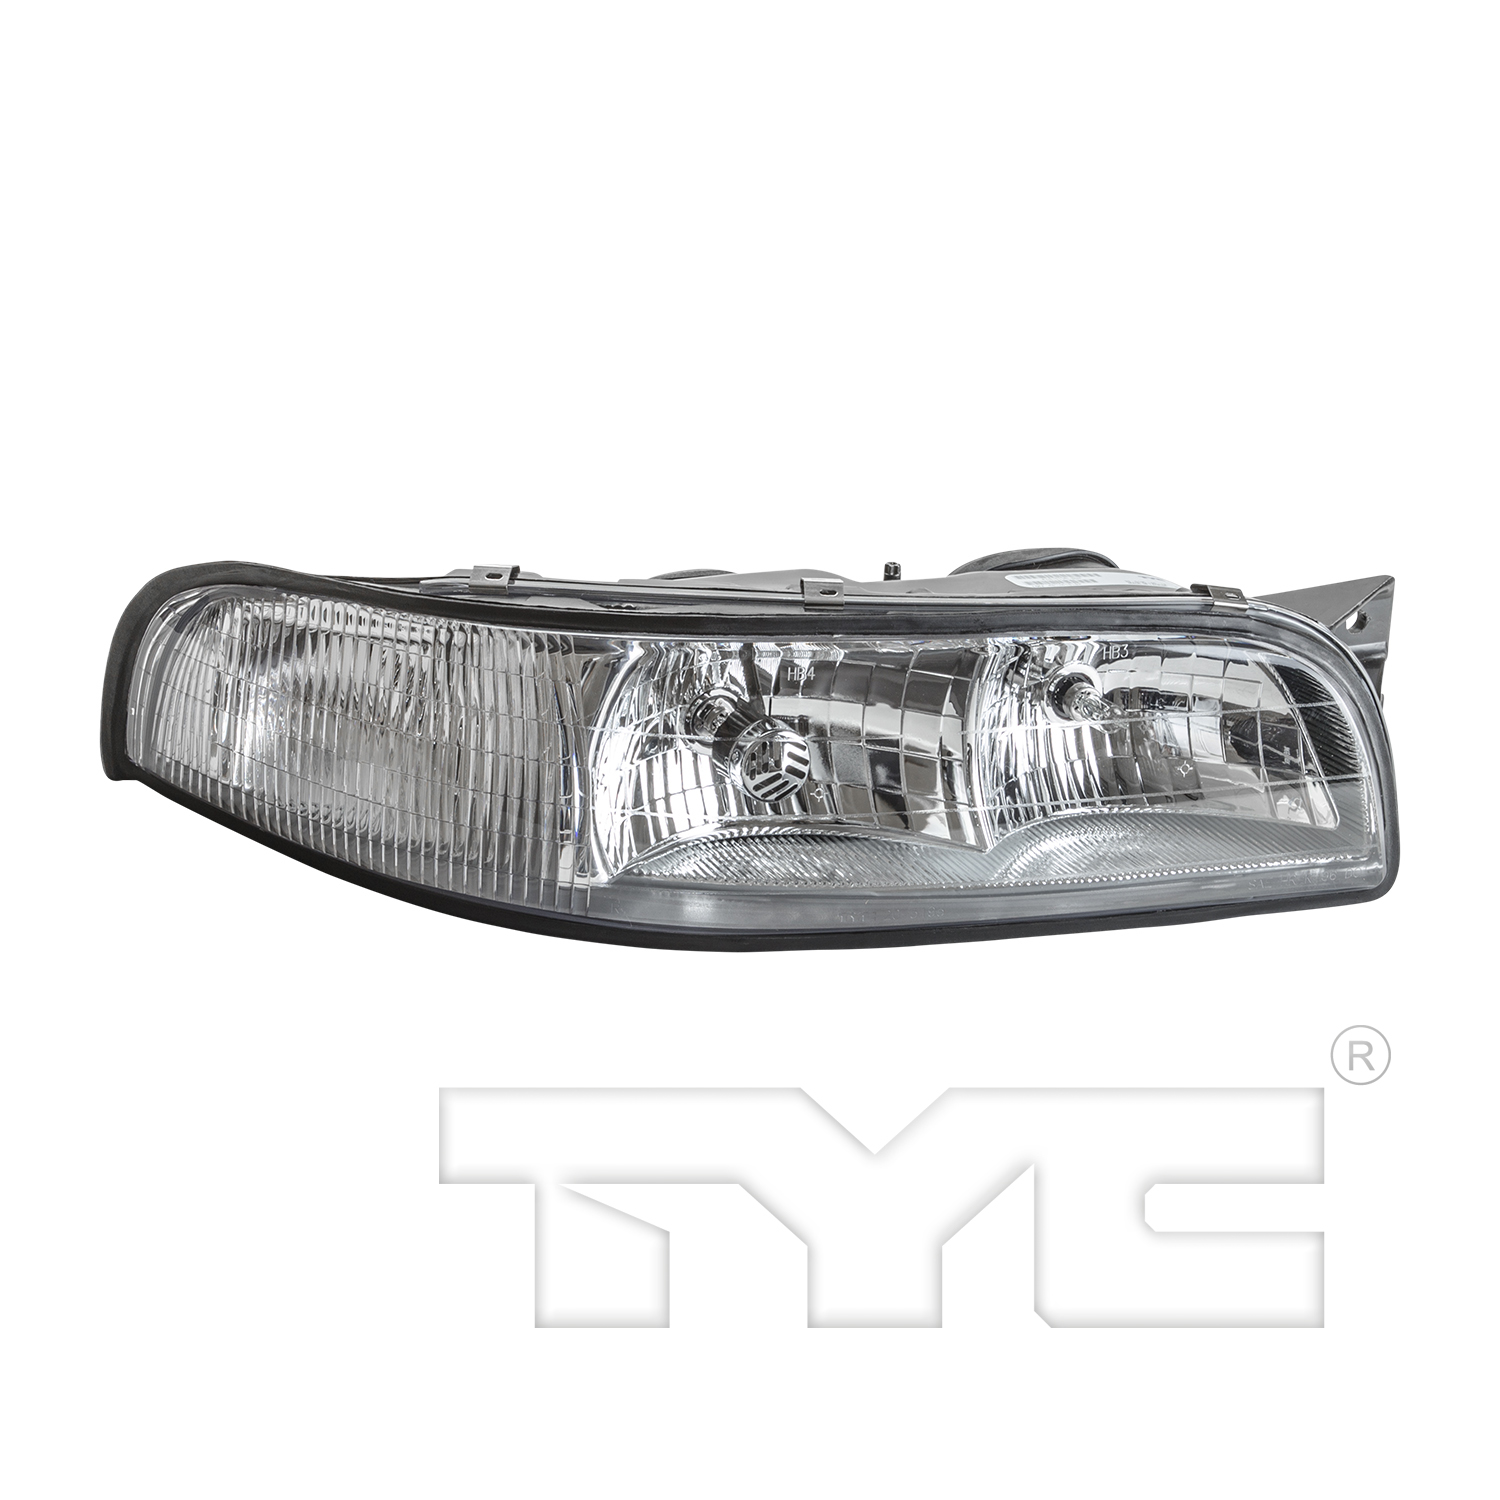 Aftermarket HEADLIGHTS for BUICK - LESABRE, LESABRE,97-99,RT Headlamp assy composite